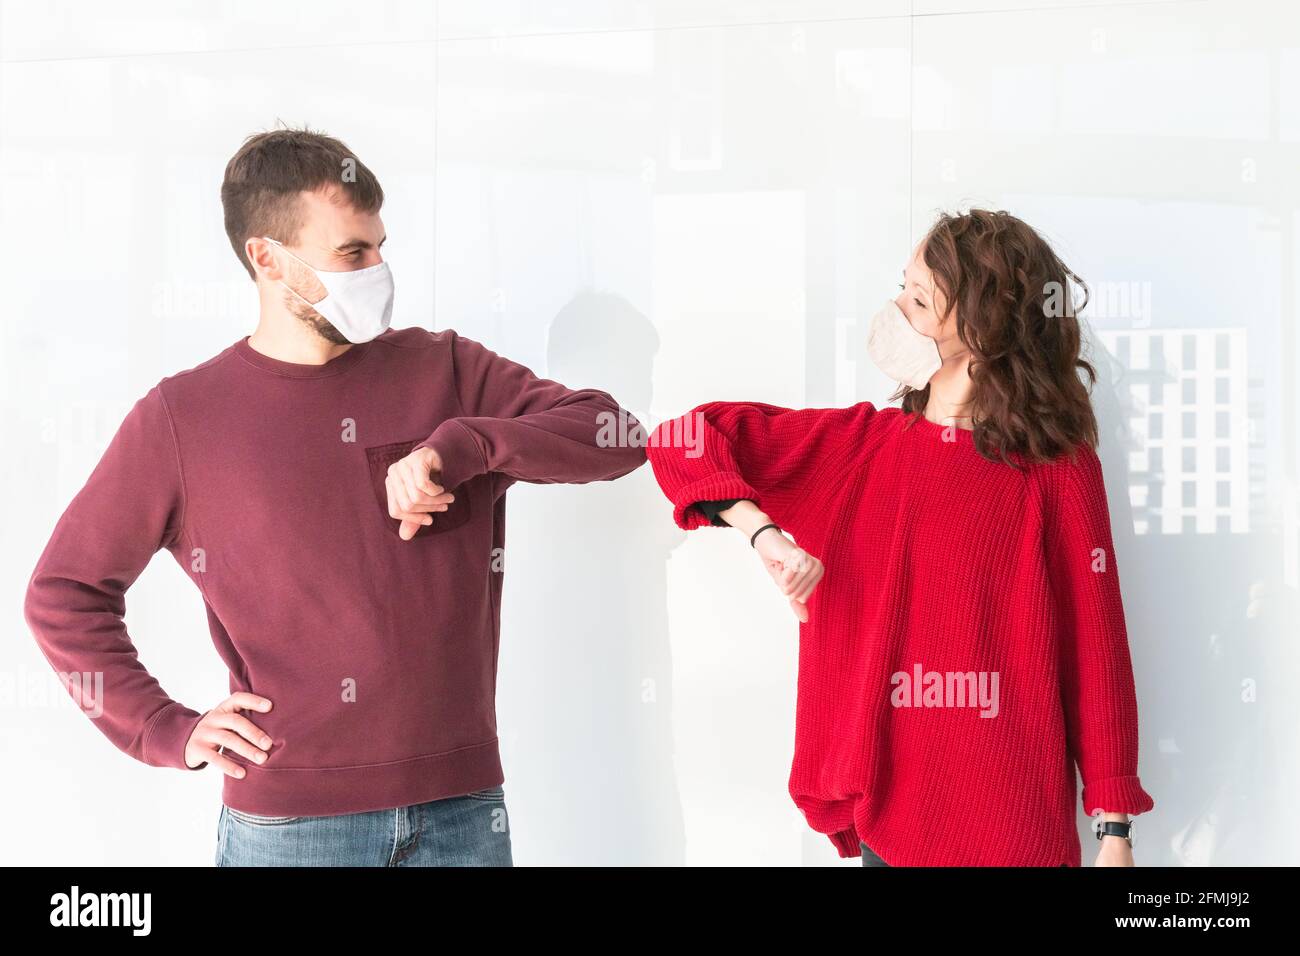 Greeting with elbow bump in street. Two people greet elbows bump. Colleagues are doing elbow bumps in office. New style of greeting during coronavirus Stock Photo